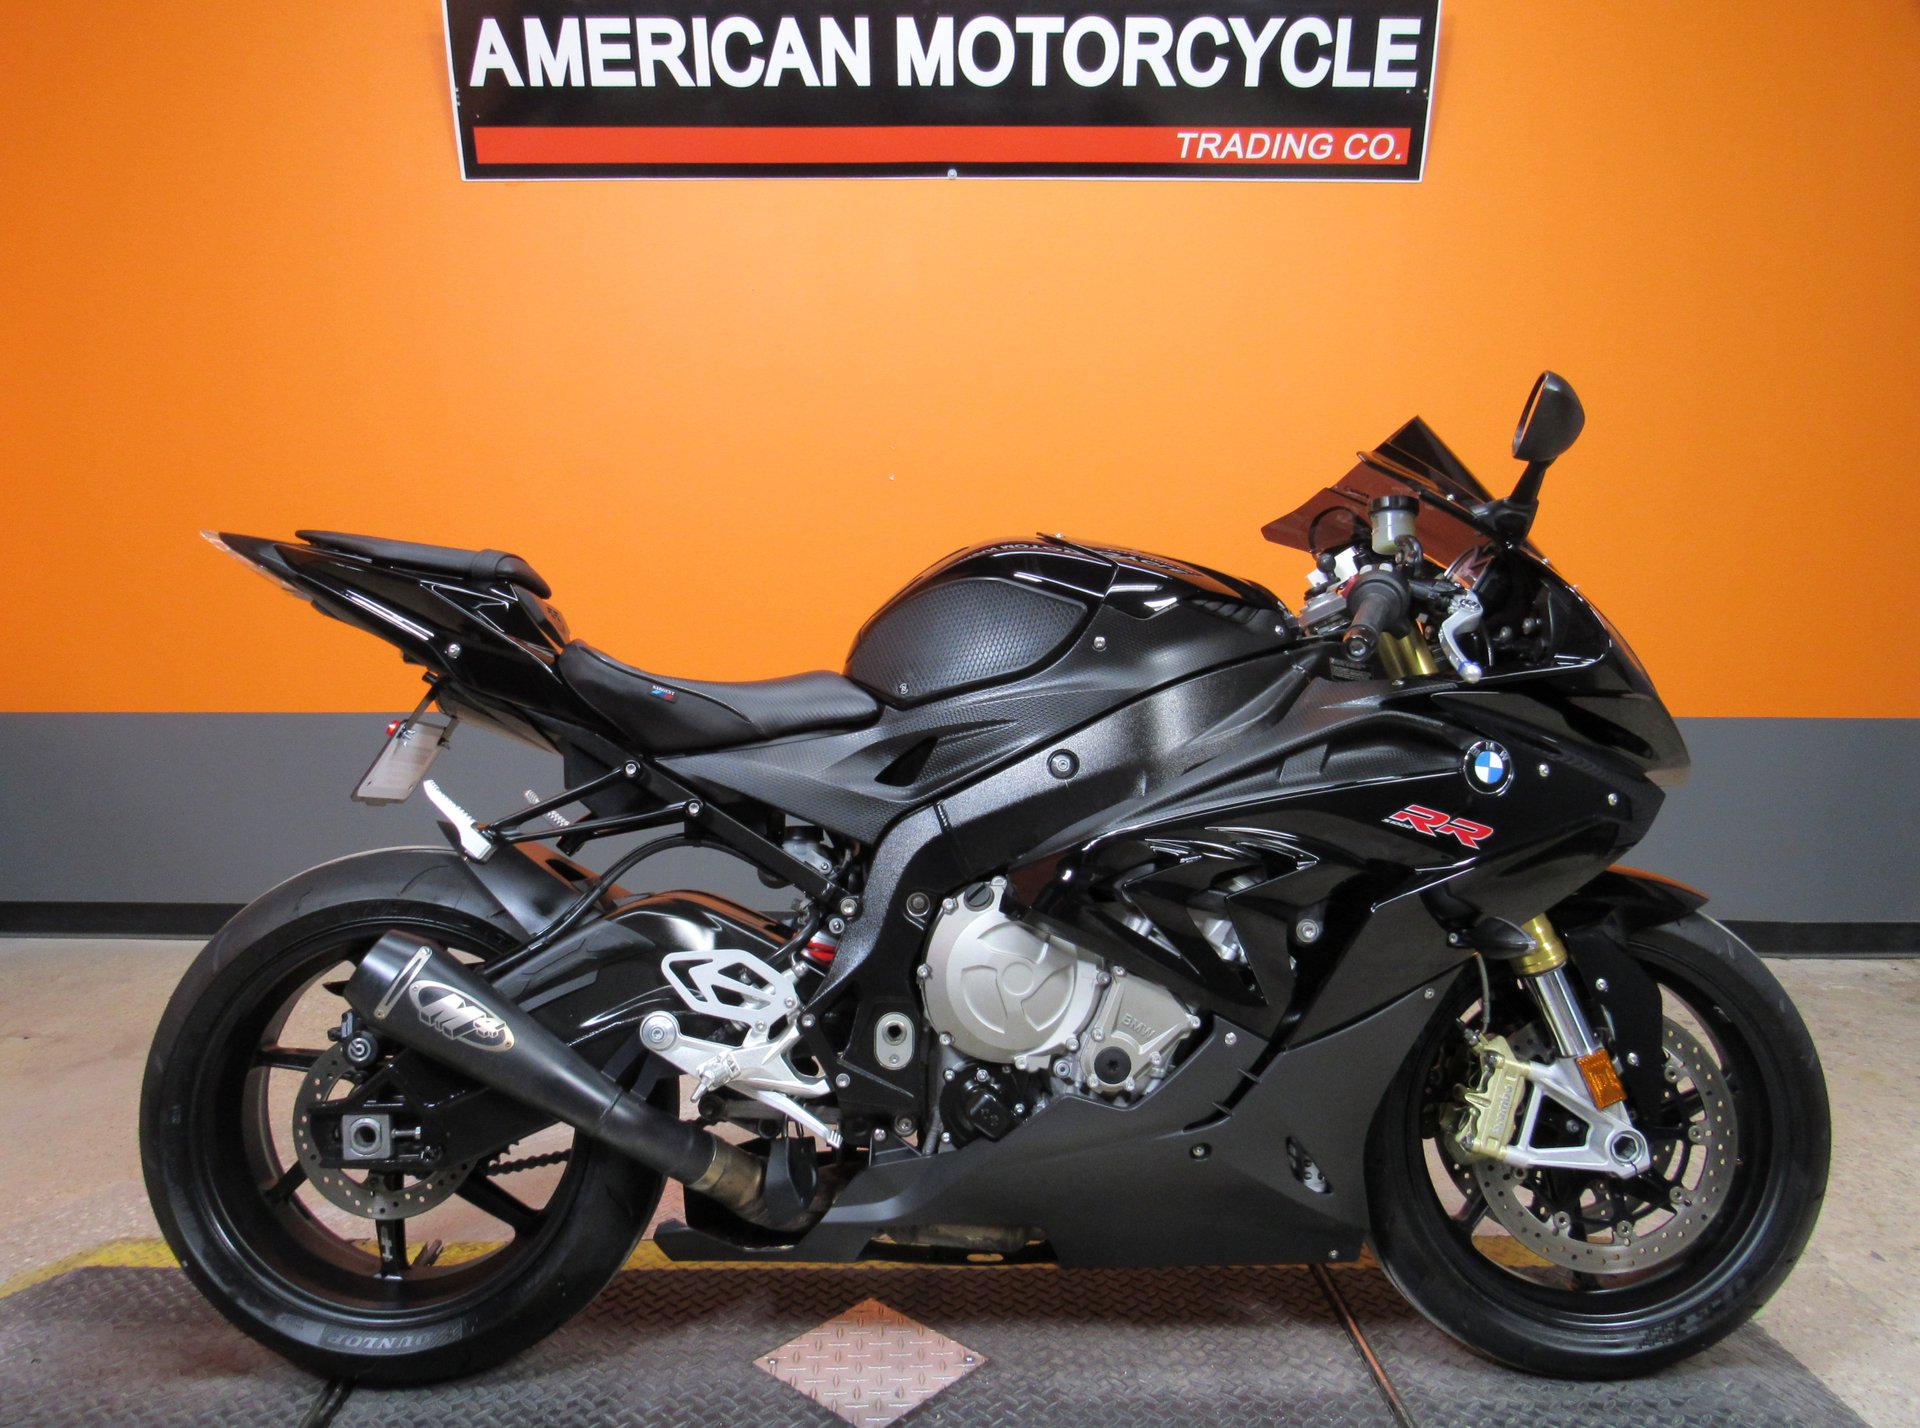 2016 BMW S1000RR | American Motorcycle Trading Company - Used Harley ...